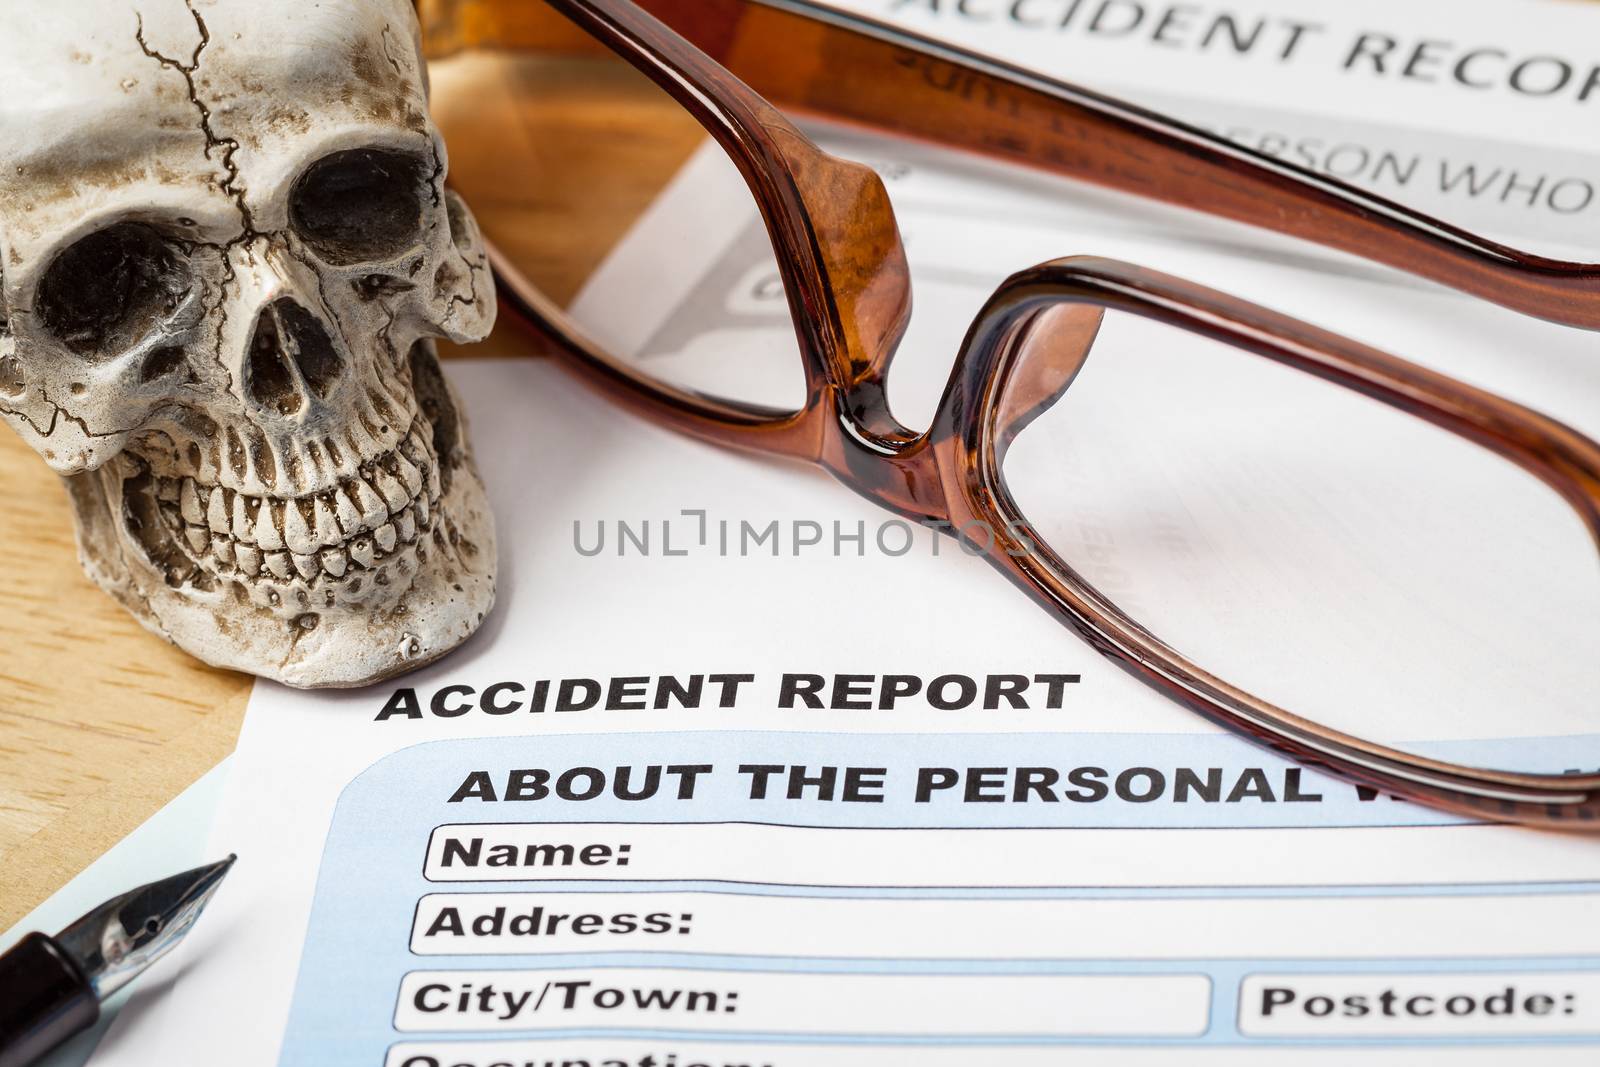 Accident report application form and human skull on brown envelo by FrameAngel